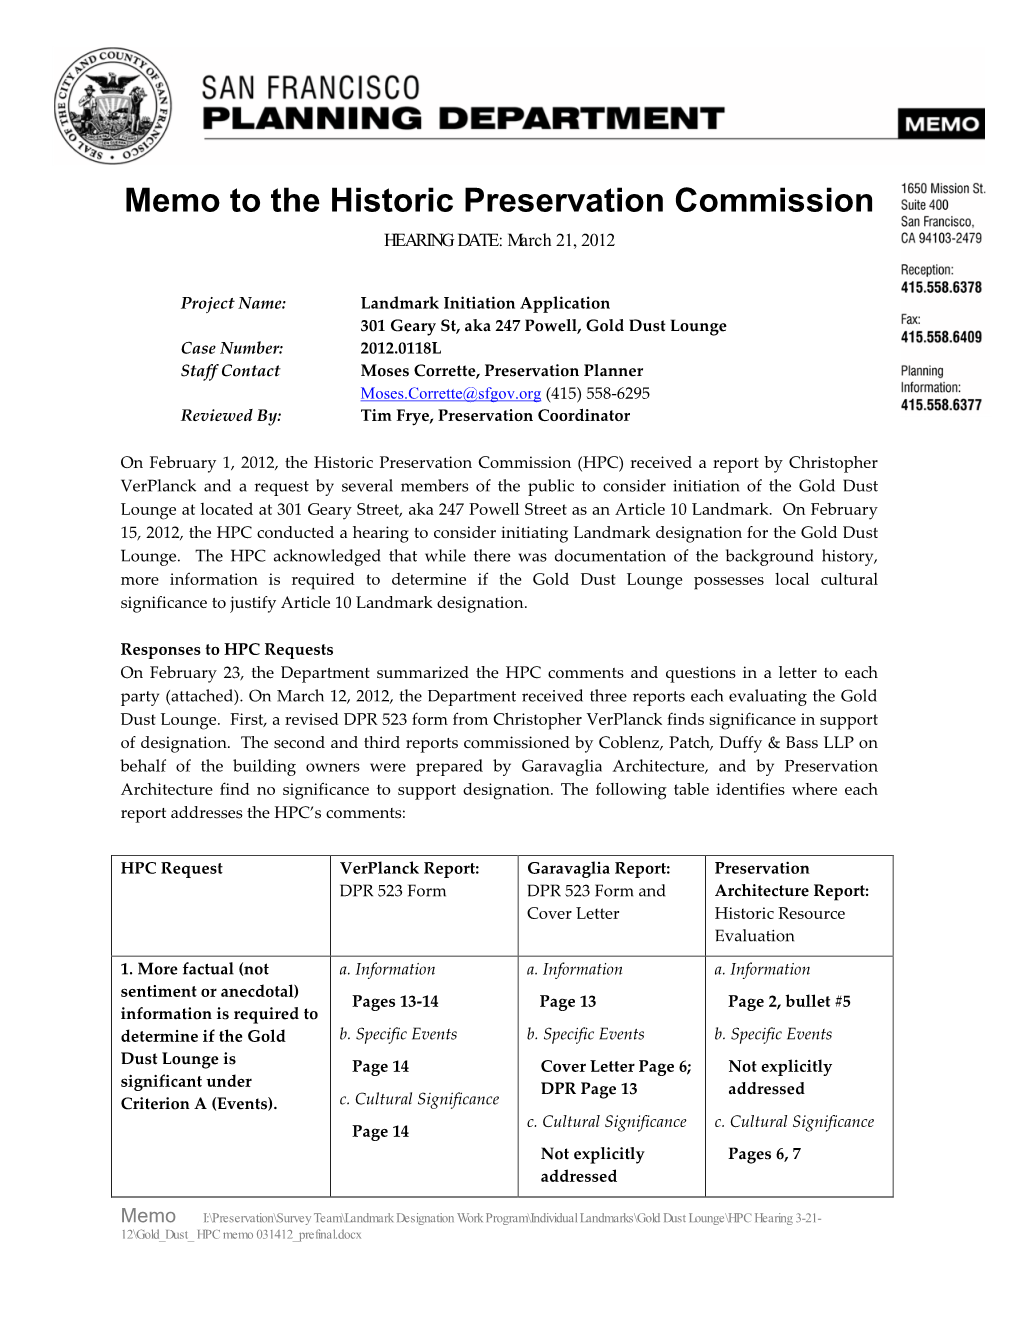 Memo to the Historic Preservation Commission HEARING DATE: March 21, 2012